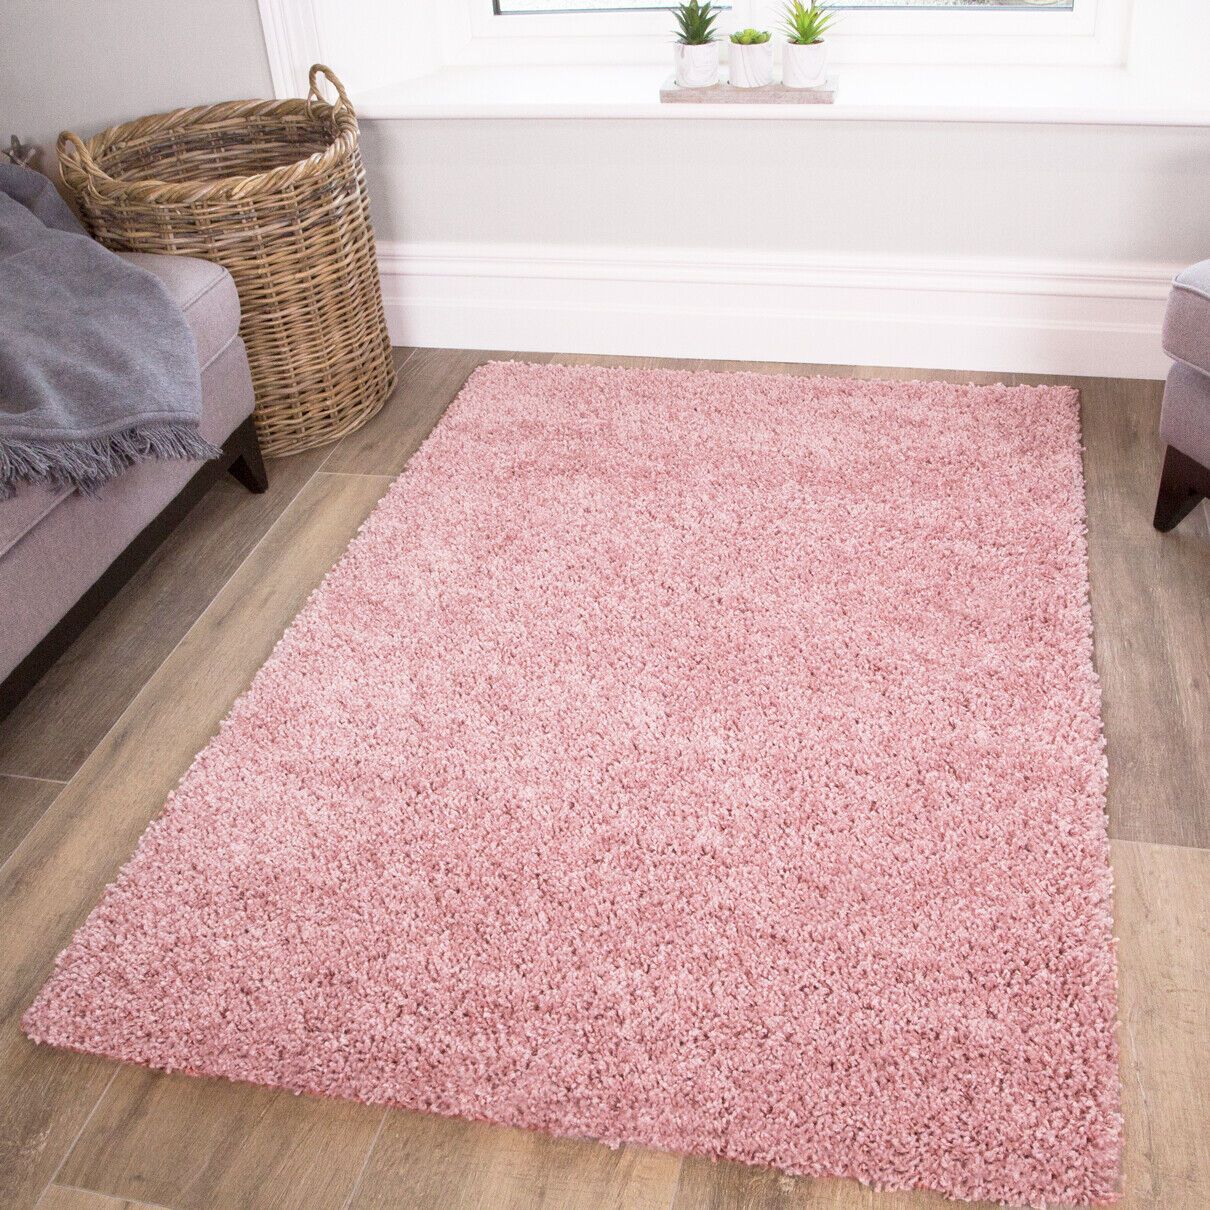 Baby Pink Shaggy Rug Soft Warm Thick Non Shed Cosy Plain Living Room Shaggy  Rugs | Ebay Within Light Pink Rugs (View 11 of 15)